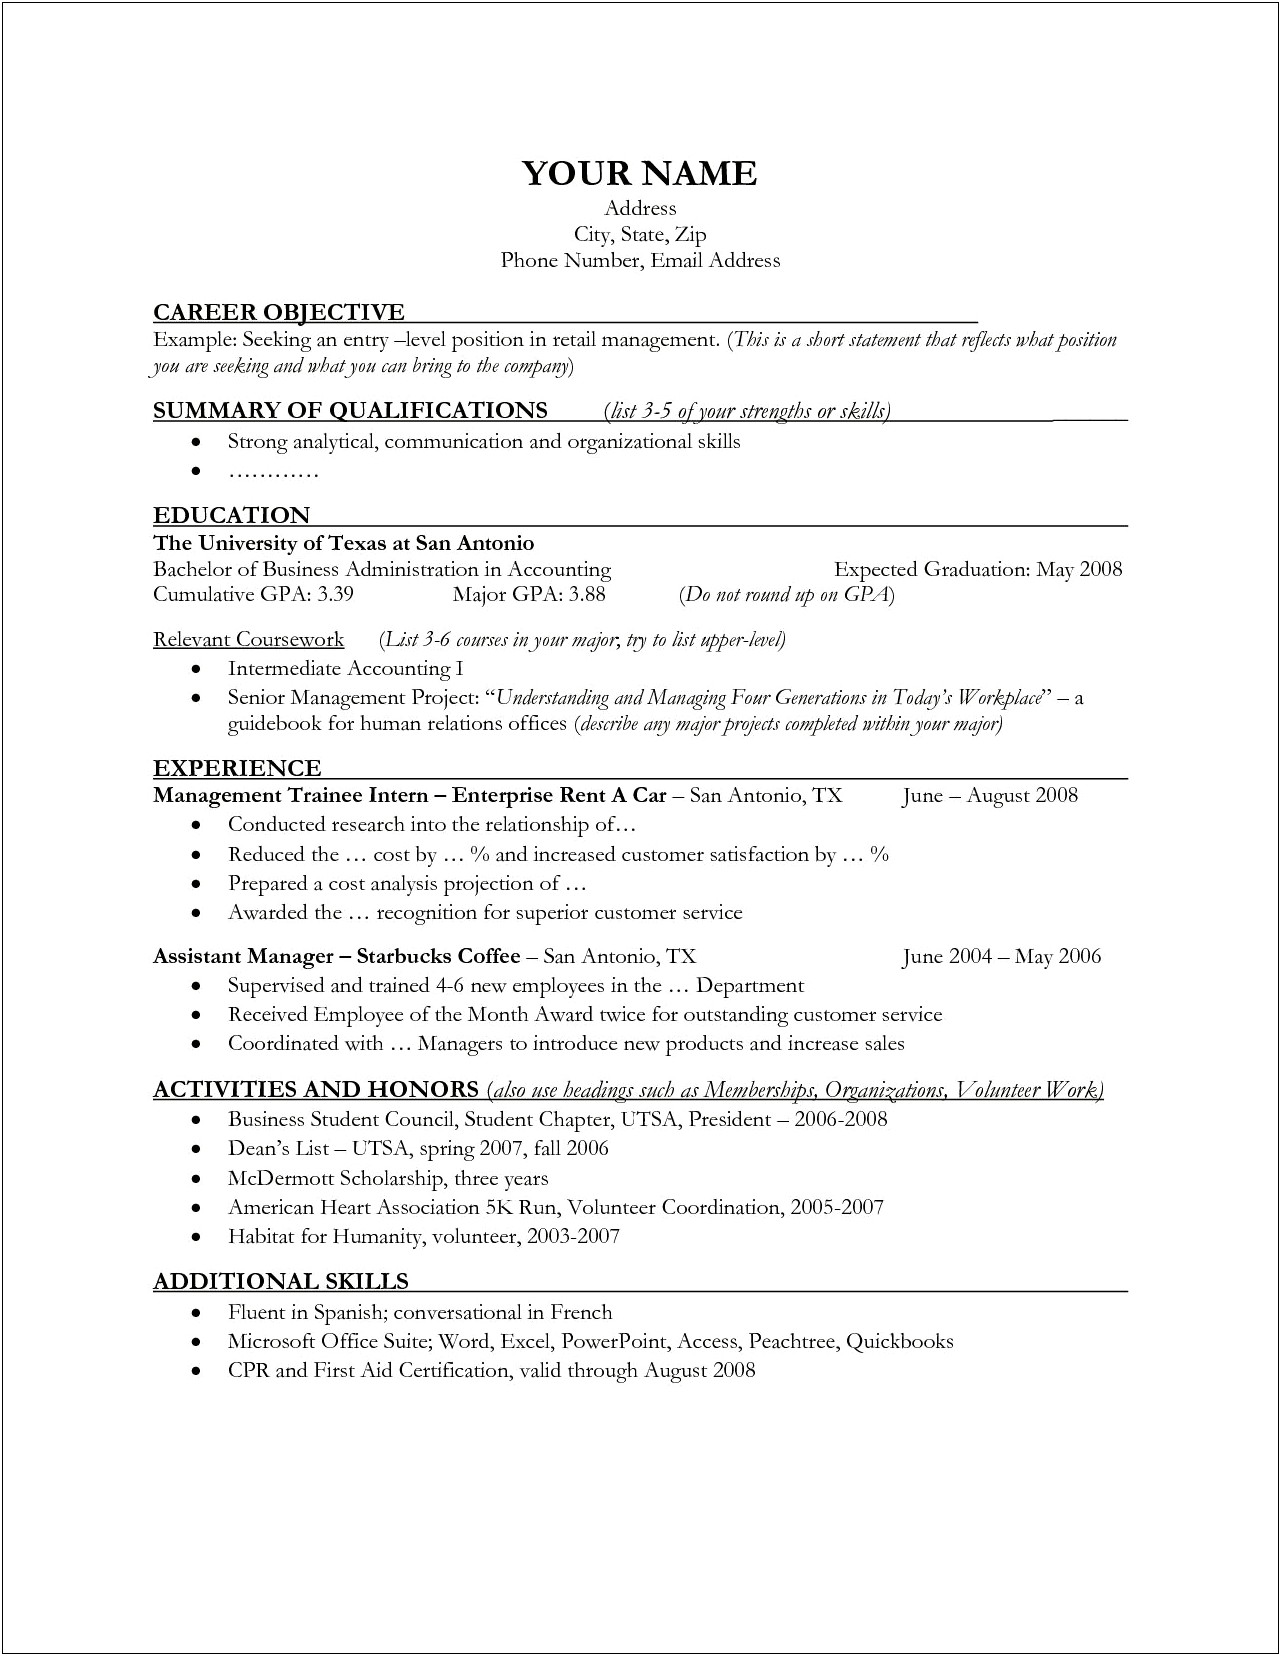 Resume Objective For Retail Assistant Manager